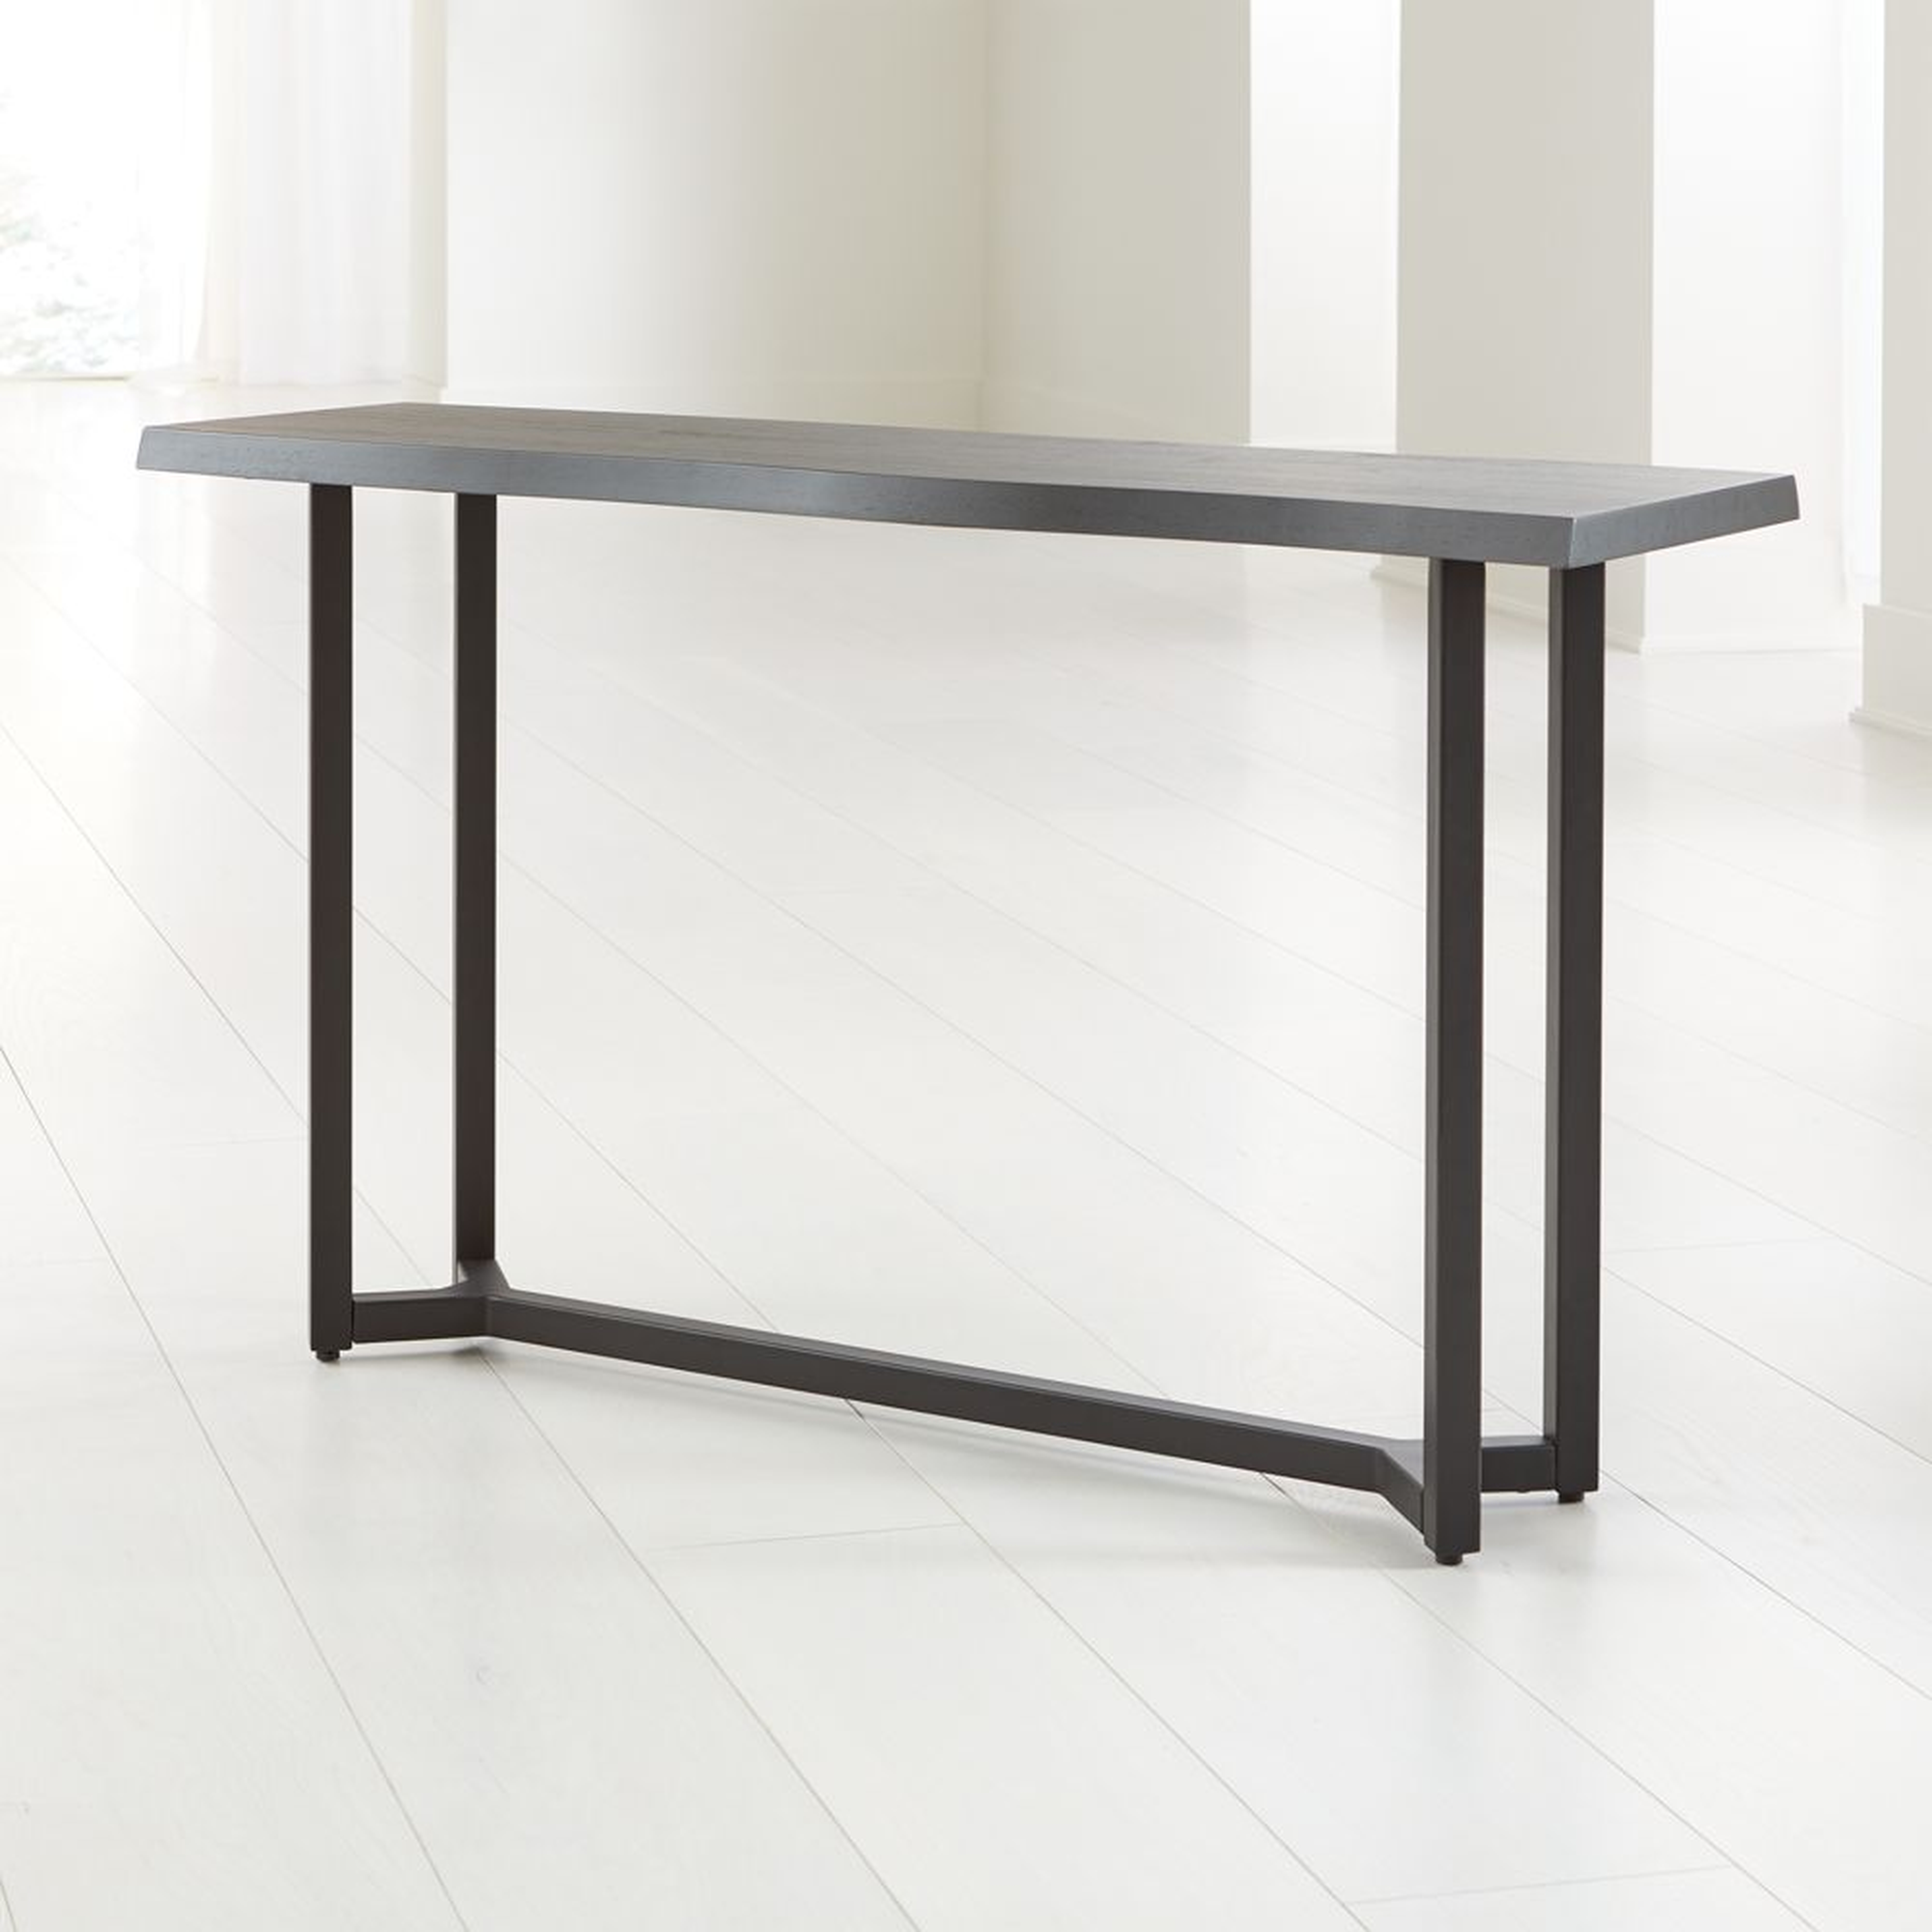 Verge Black Live Edge Console Table - Crate and Barrel